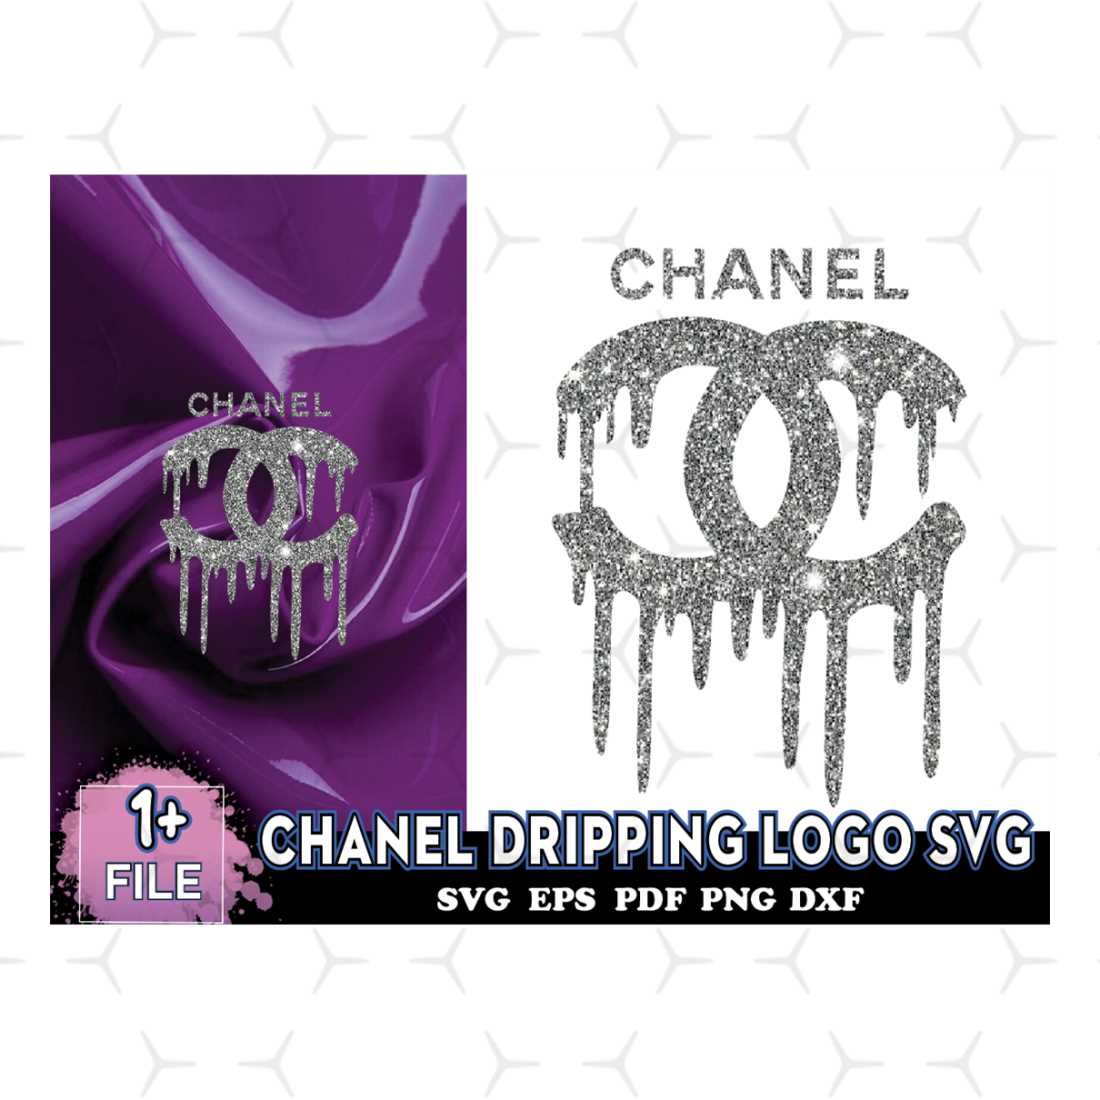 ashley theurer recommends dripping chanel shirt pic